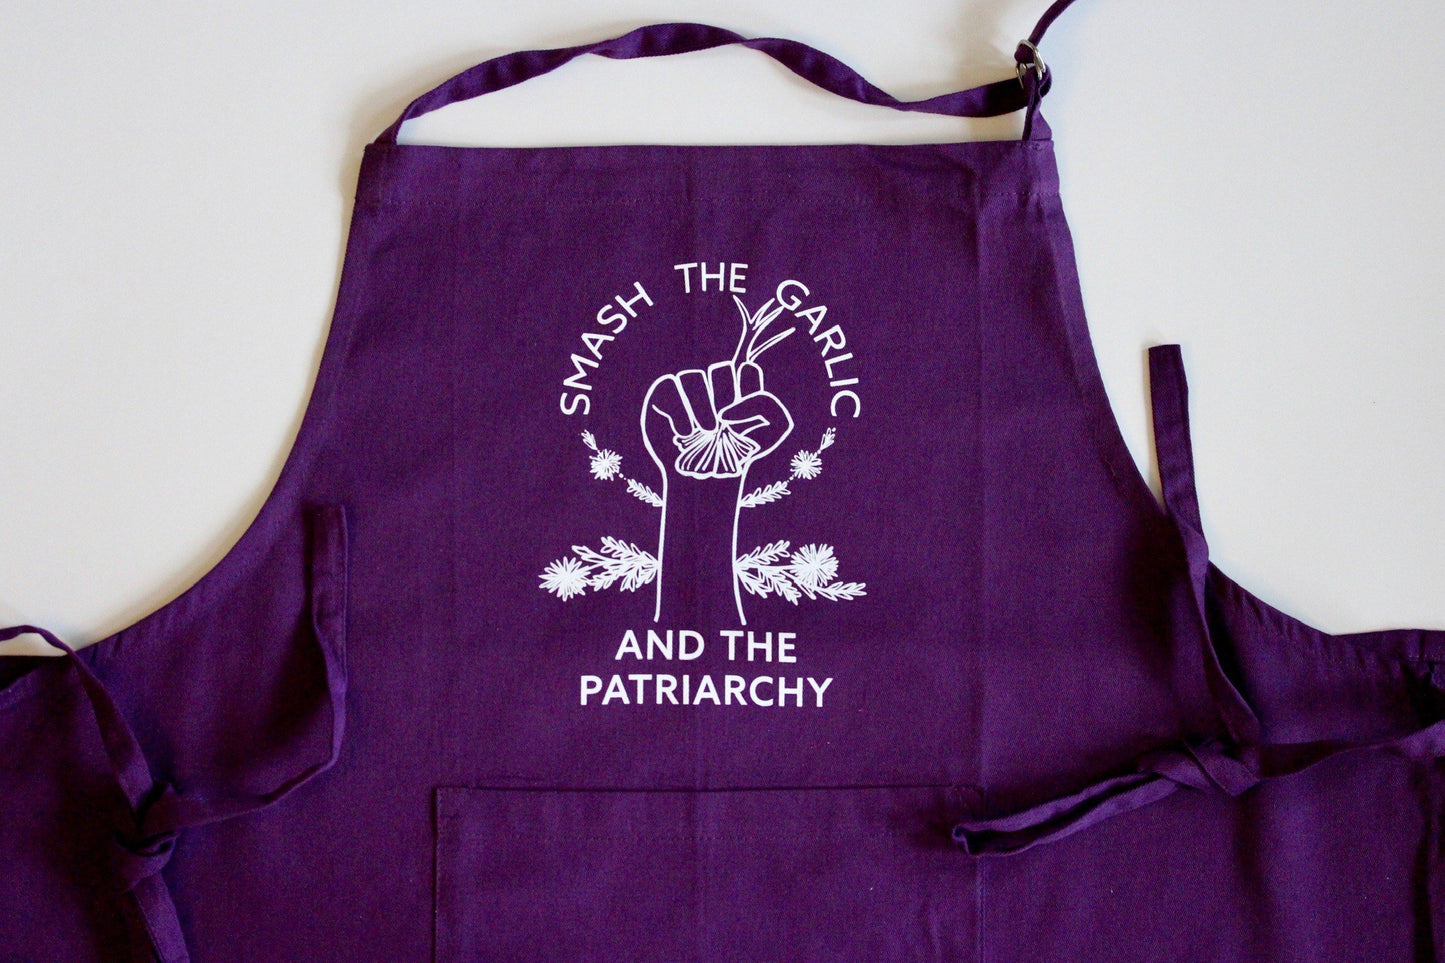 A dark purple plus size apron that reads "Smash the Garlic and the Patriarchy" in white lettering with an illustration of a hand holding garlic